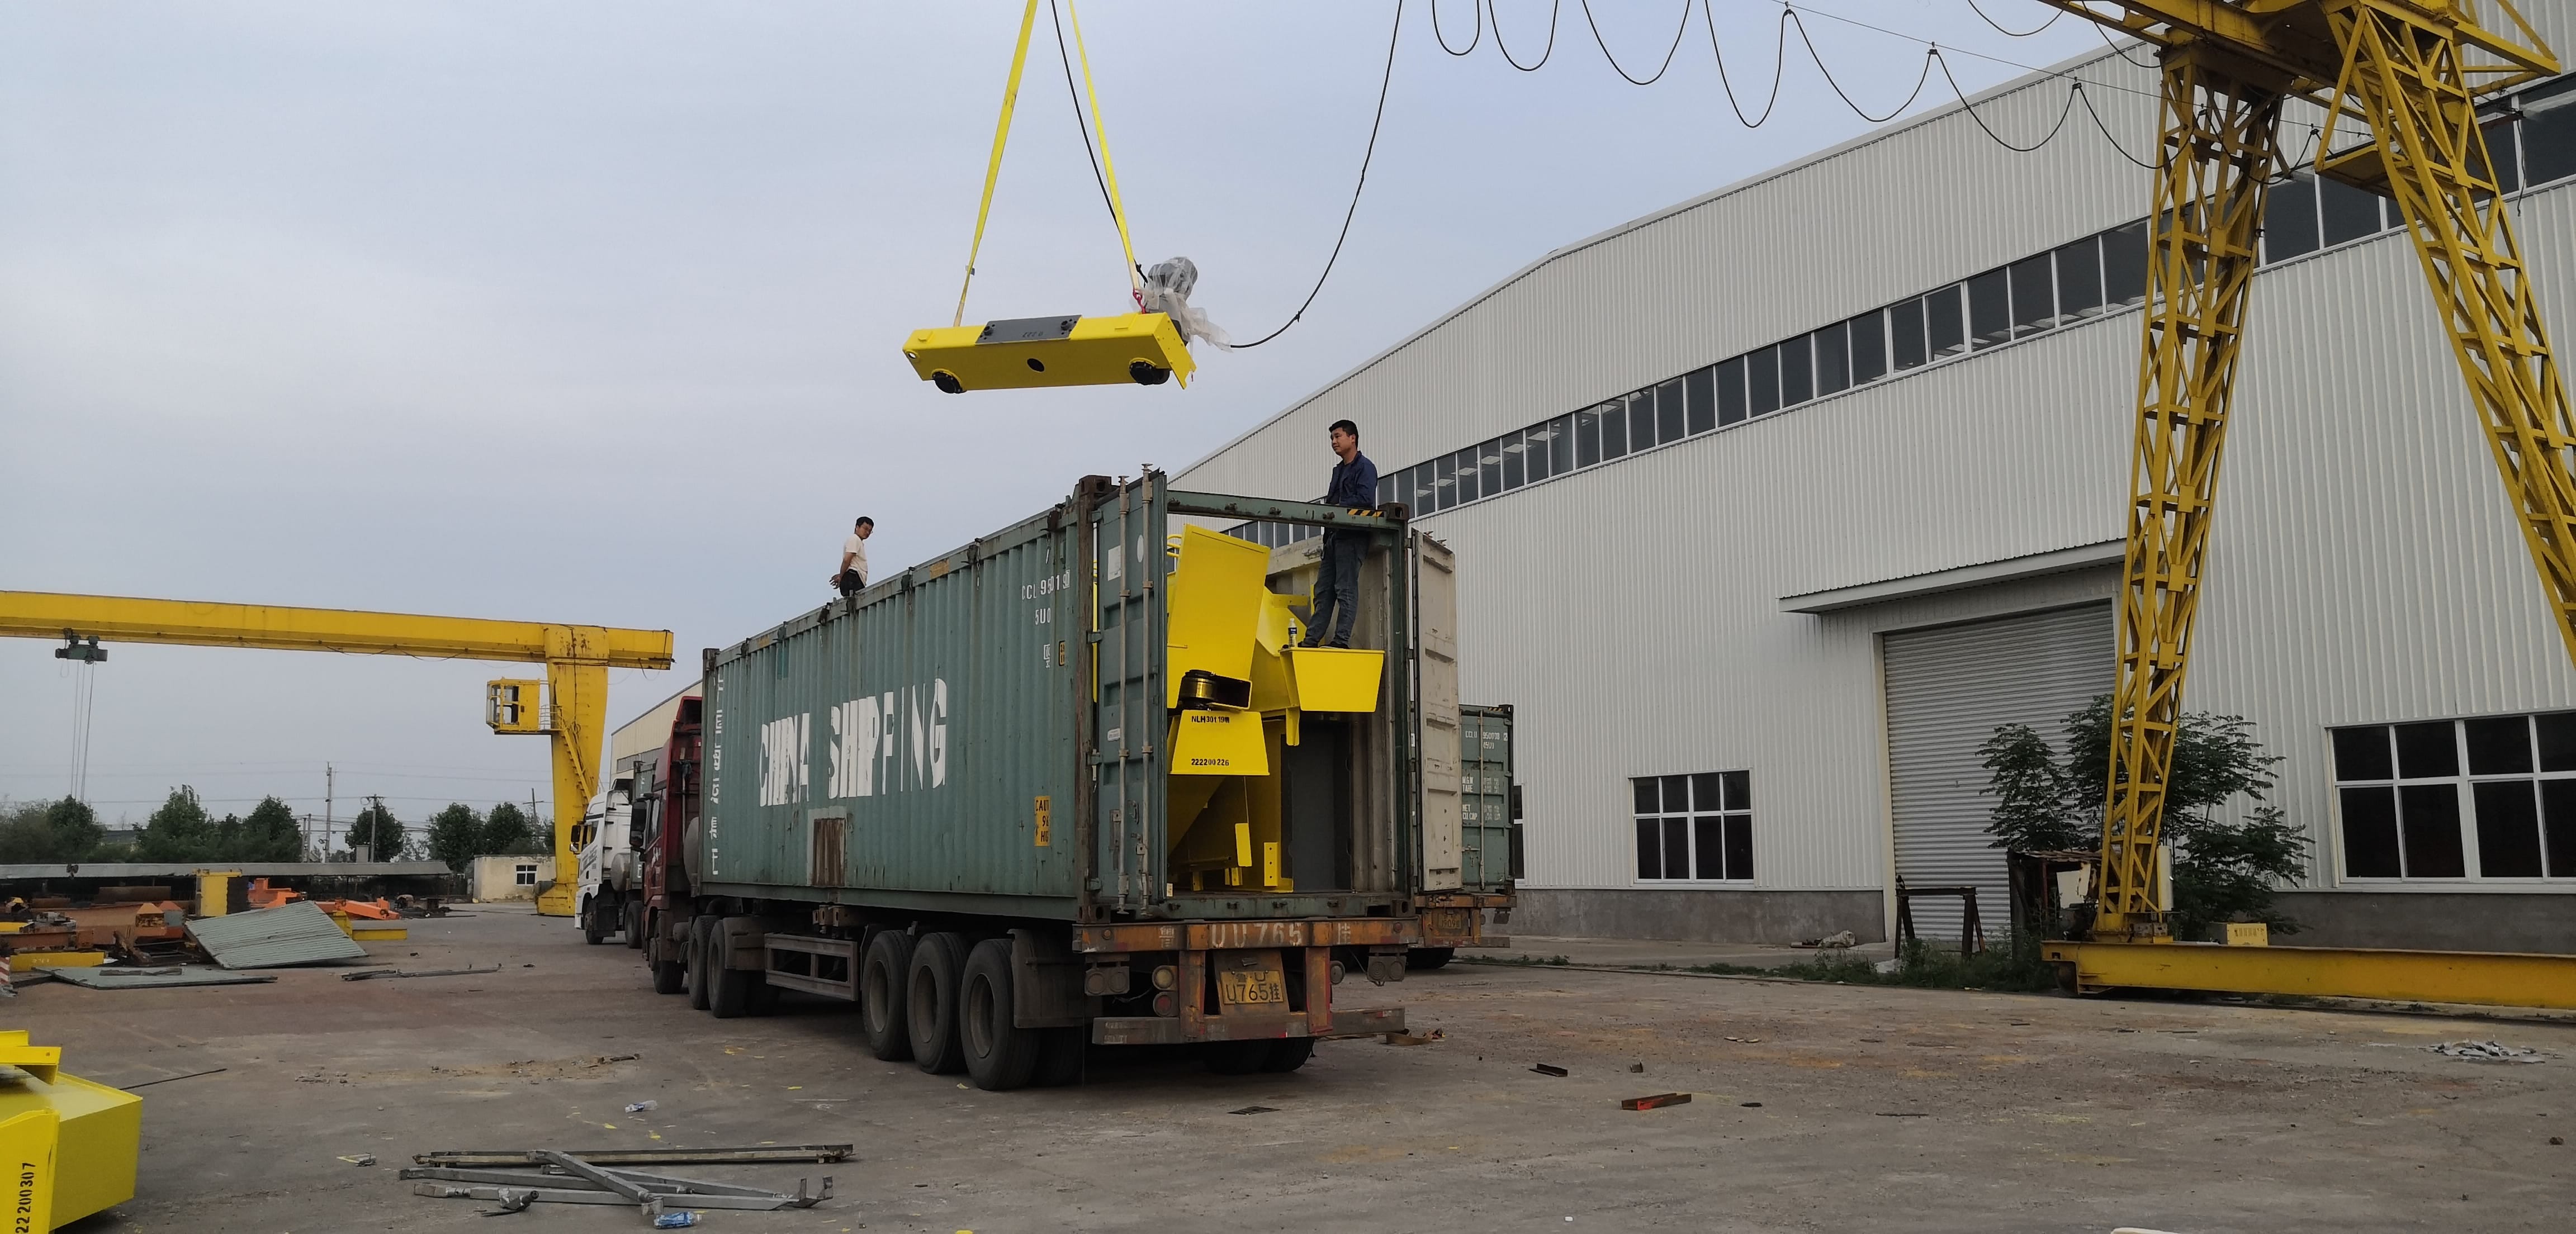 11 Sets Of NLH Overhead Crane Exported to Qatar4